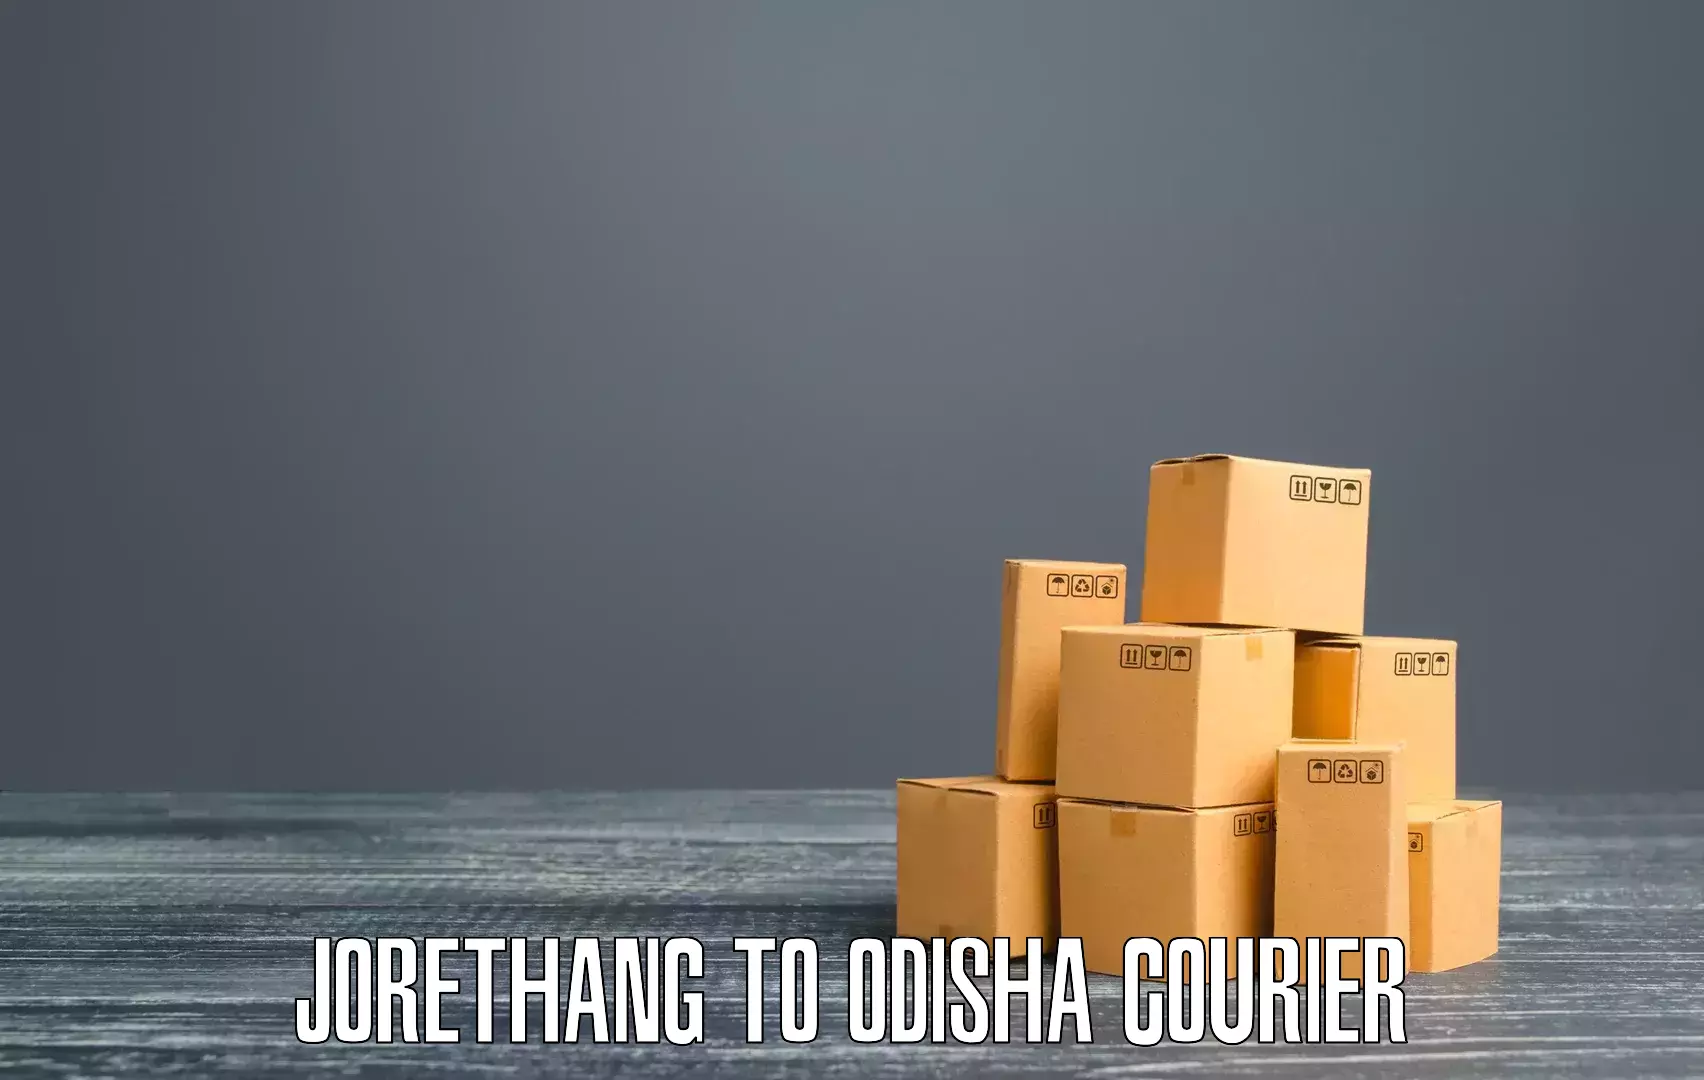 Supply chain efficiency Jorethang to Bonth